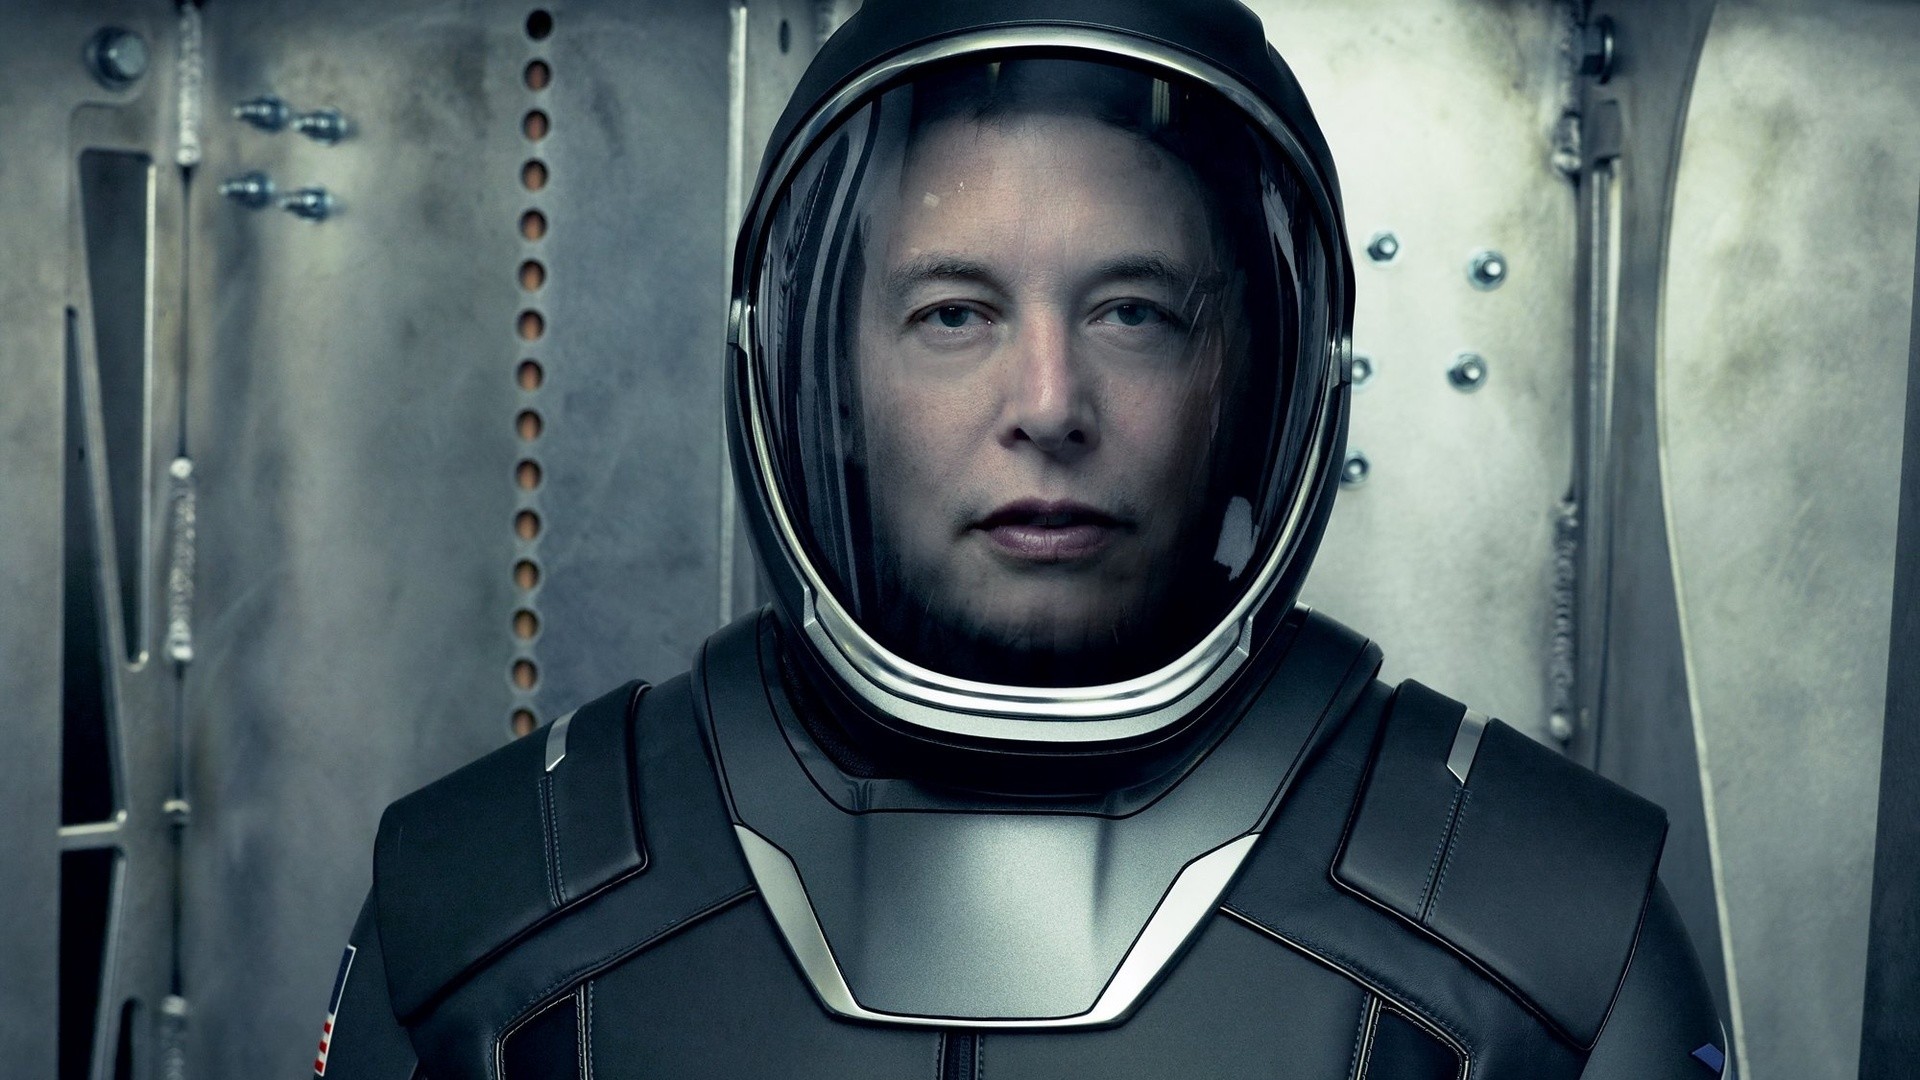 1920x1080 Elon Musk, Spacex, Ceo Of Spacex, Photos Of Elon Musk, Cosmonaut,